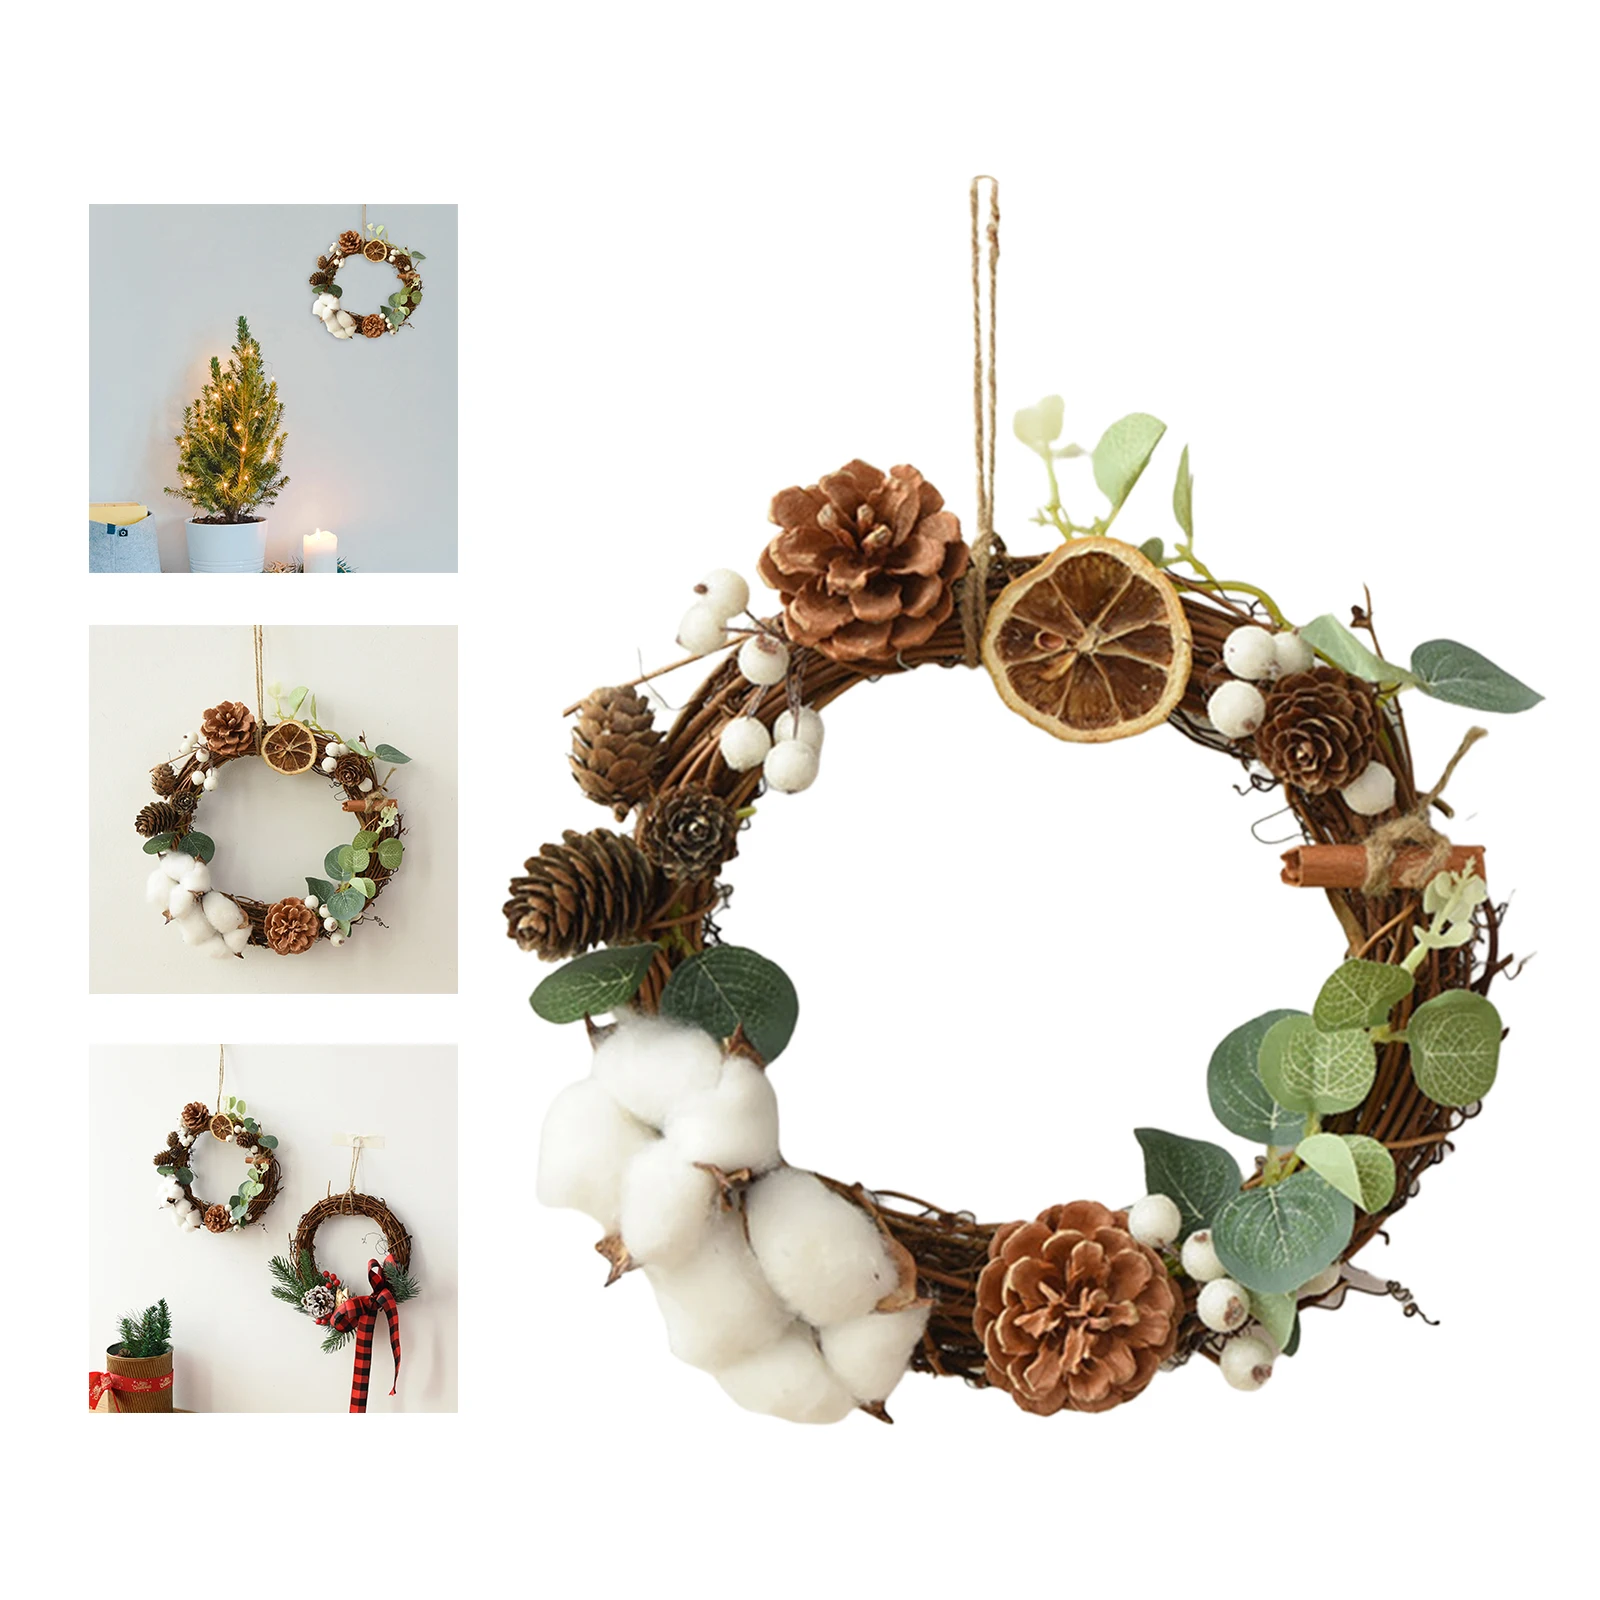 Mini 20cm Christmas Wreath Windows Natural Rattan Pine Cones Garland Decorative for Front Door Fireplace Party Wedding New Year